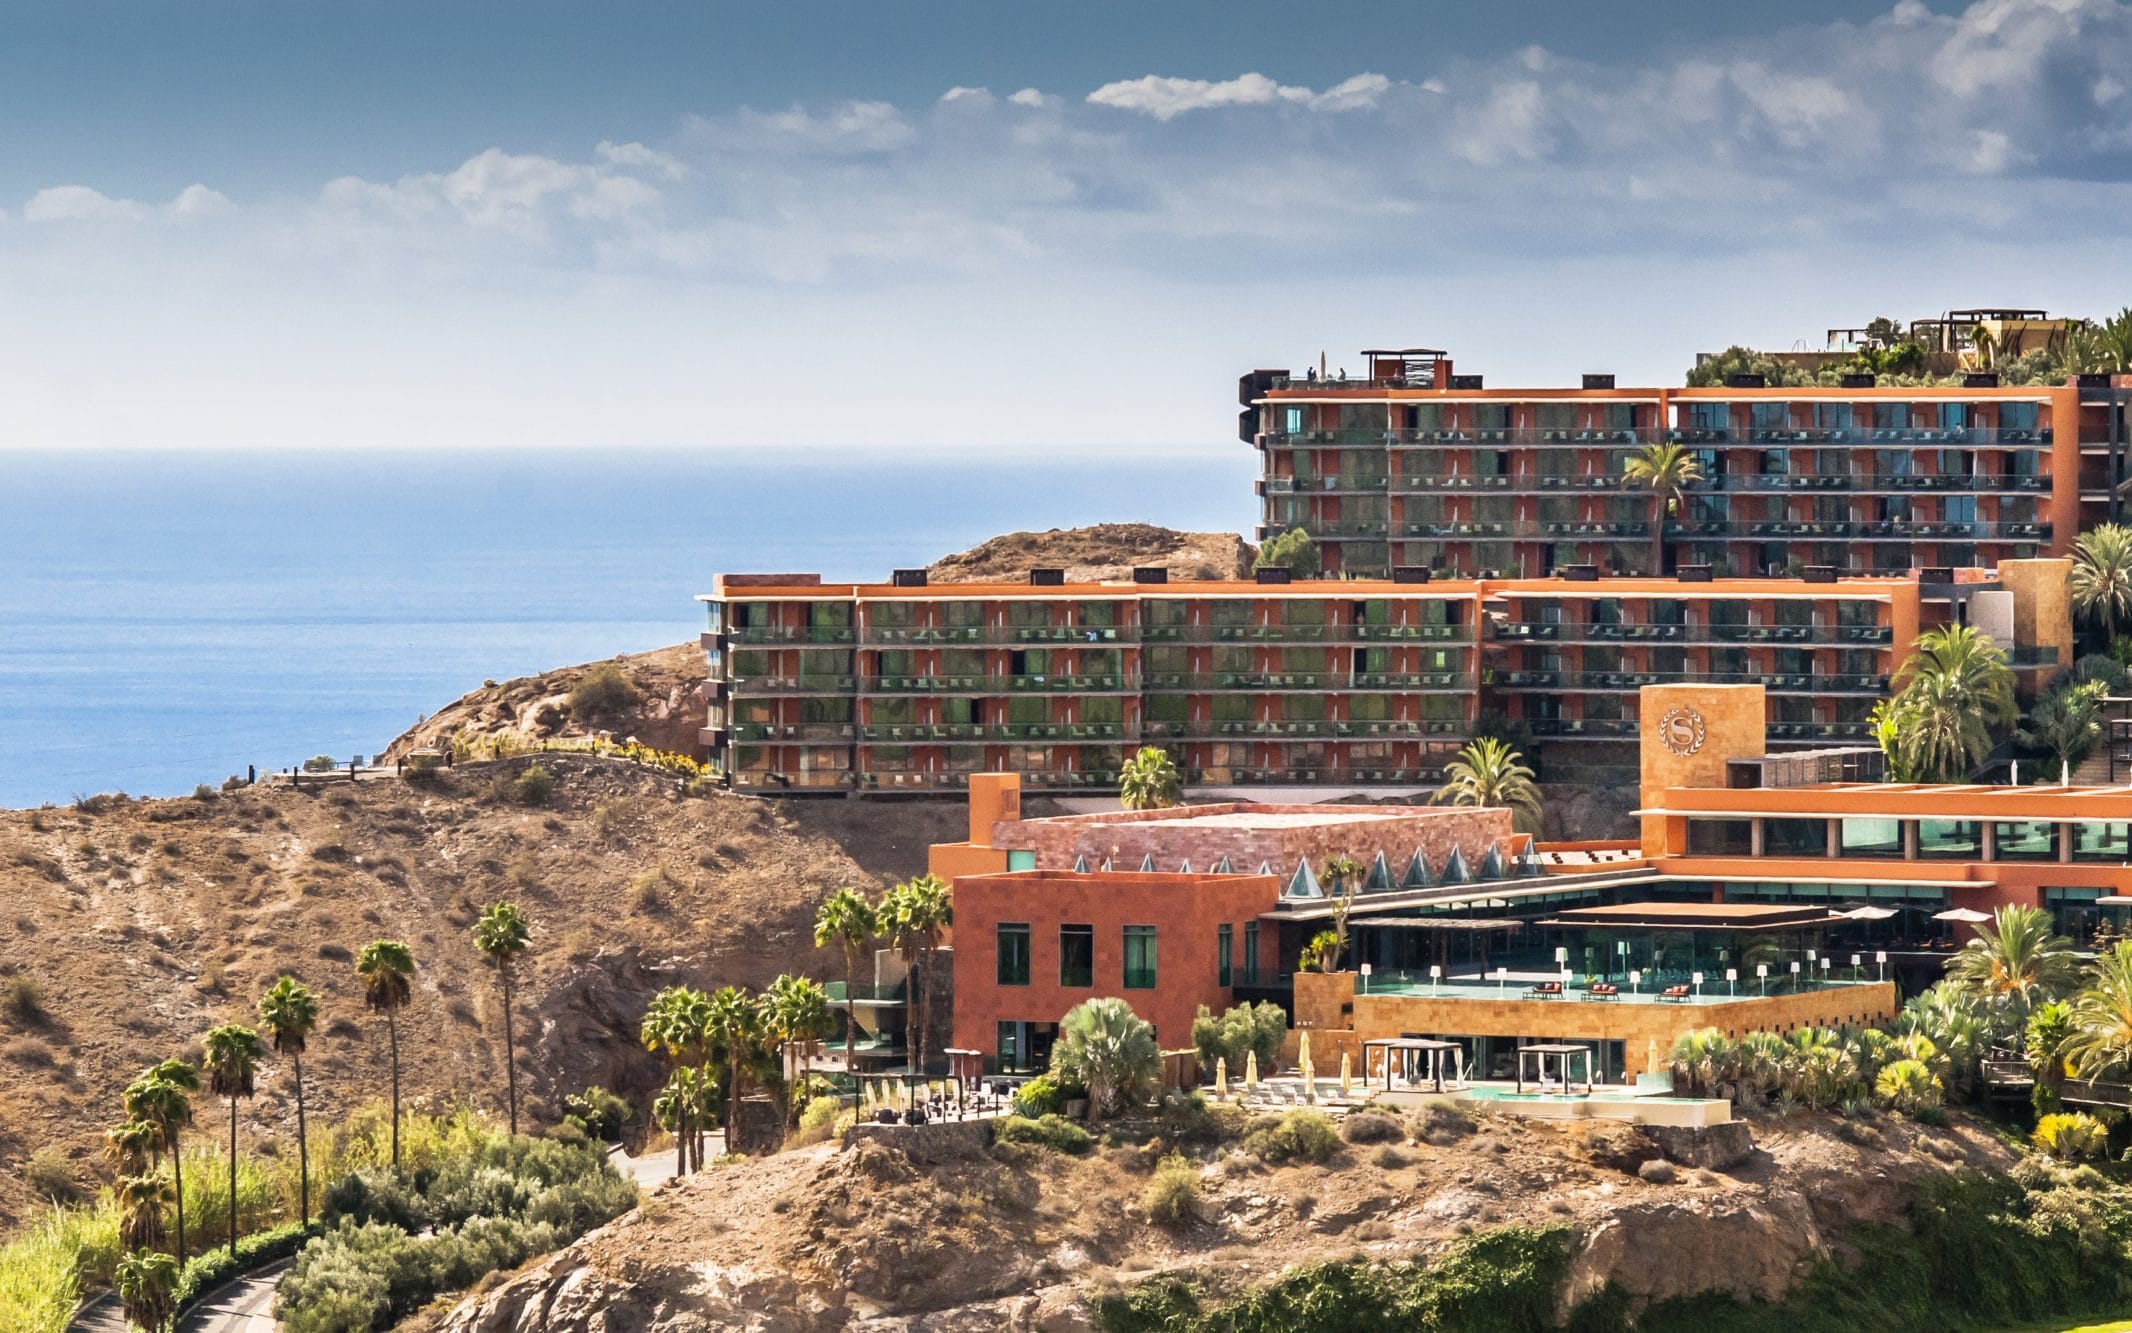 The Sheraton Gran Canaria Salobre Golf Resort is an architectural masterpiece built into the mountainside